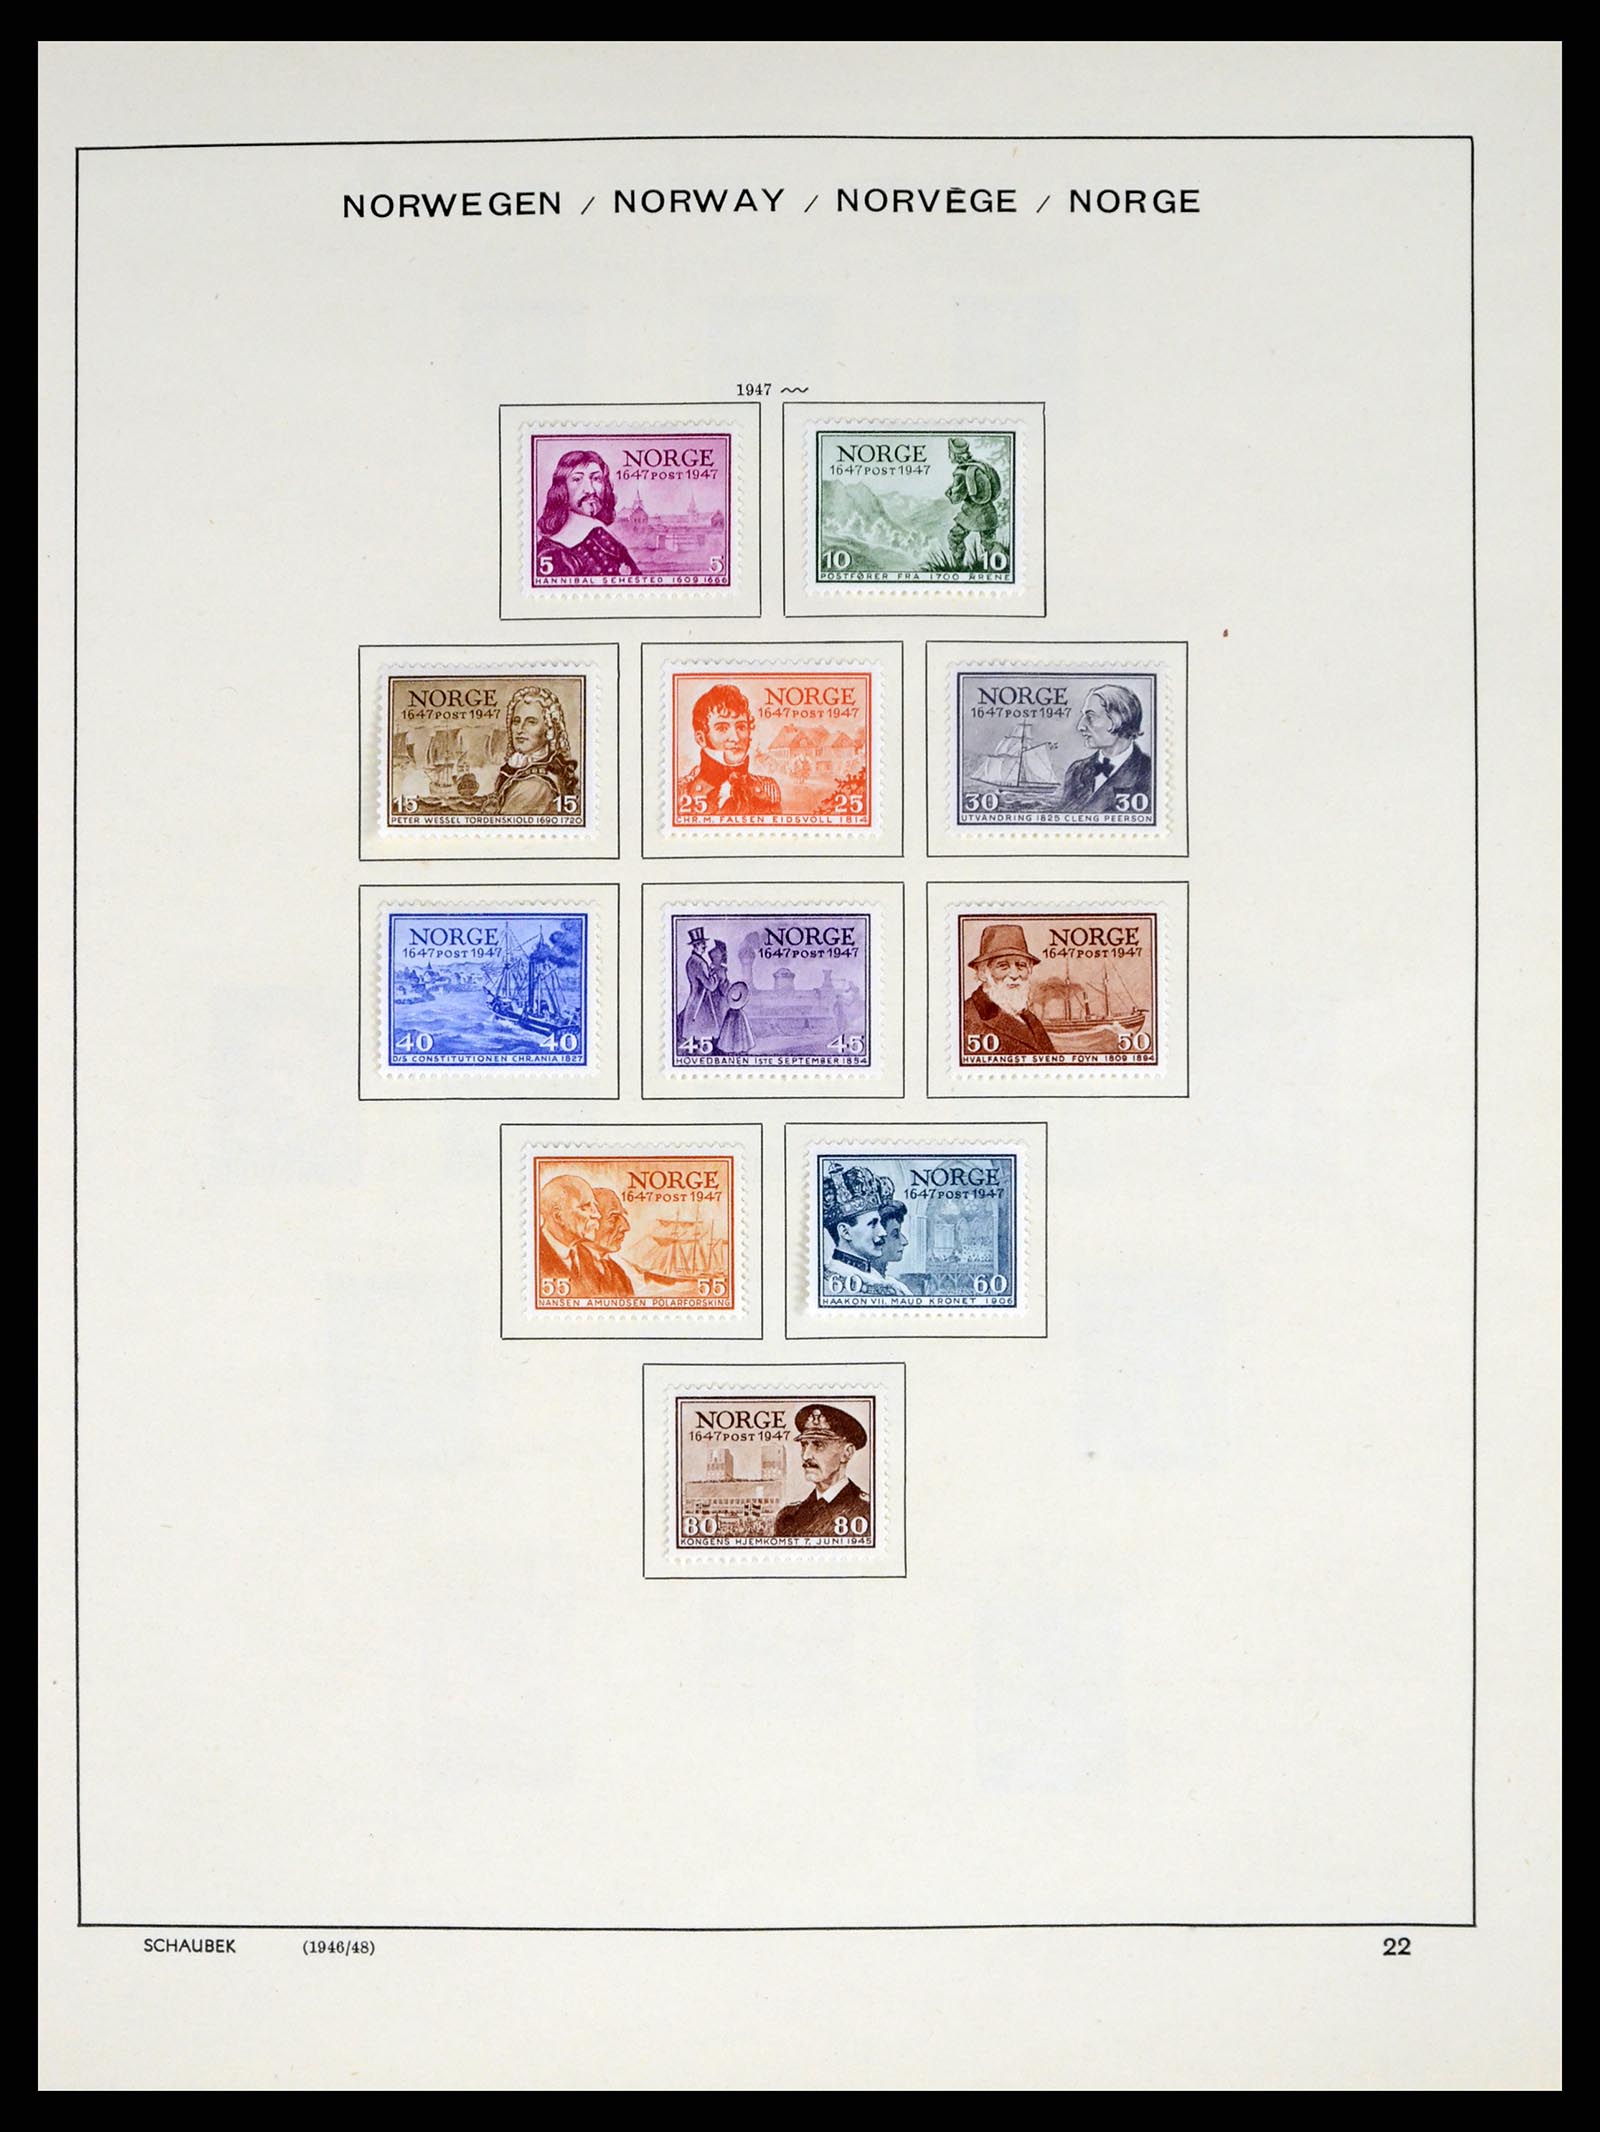 37544 020 - Stamp collection 37544 Norway 1855-2014.